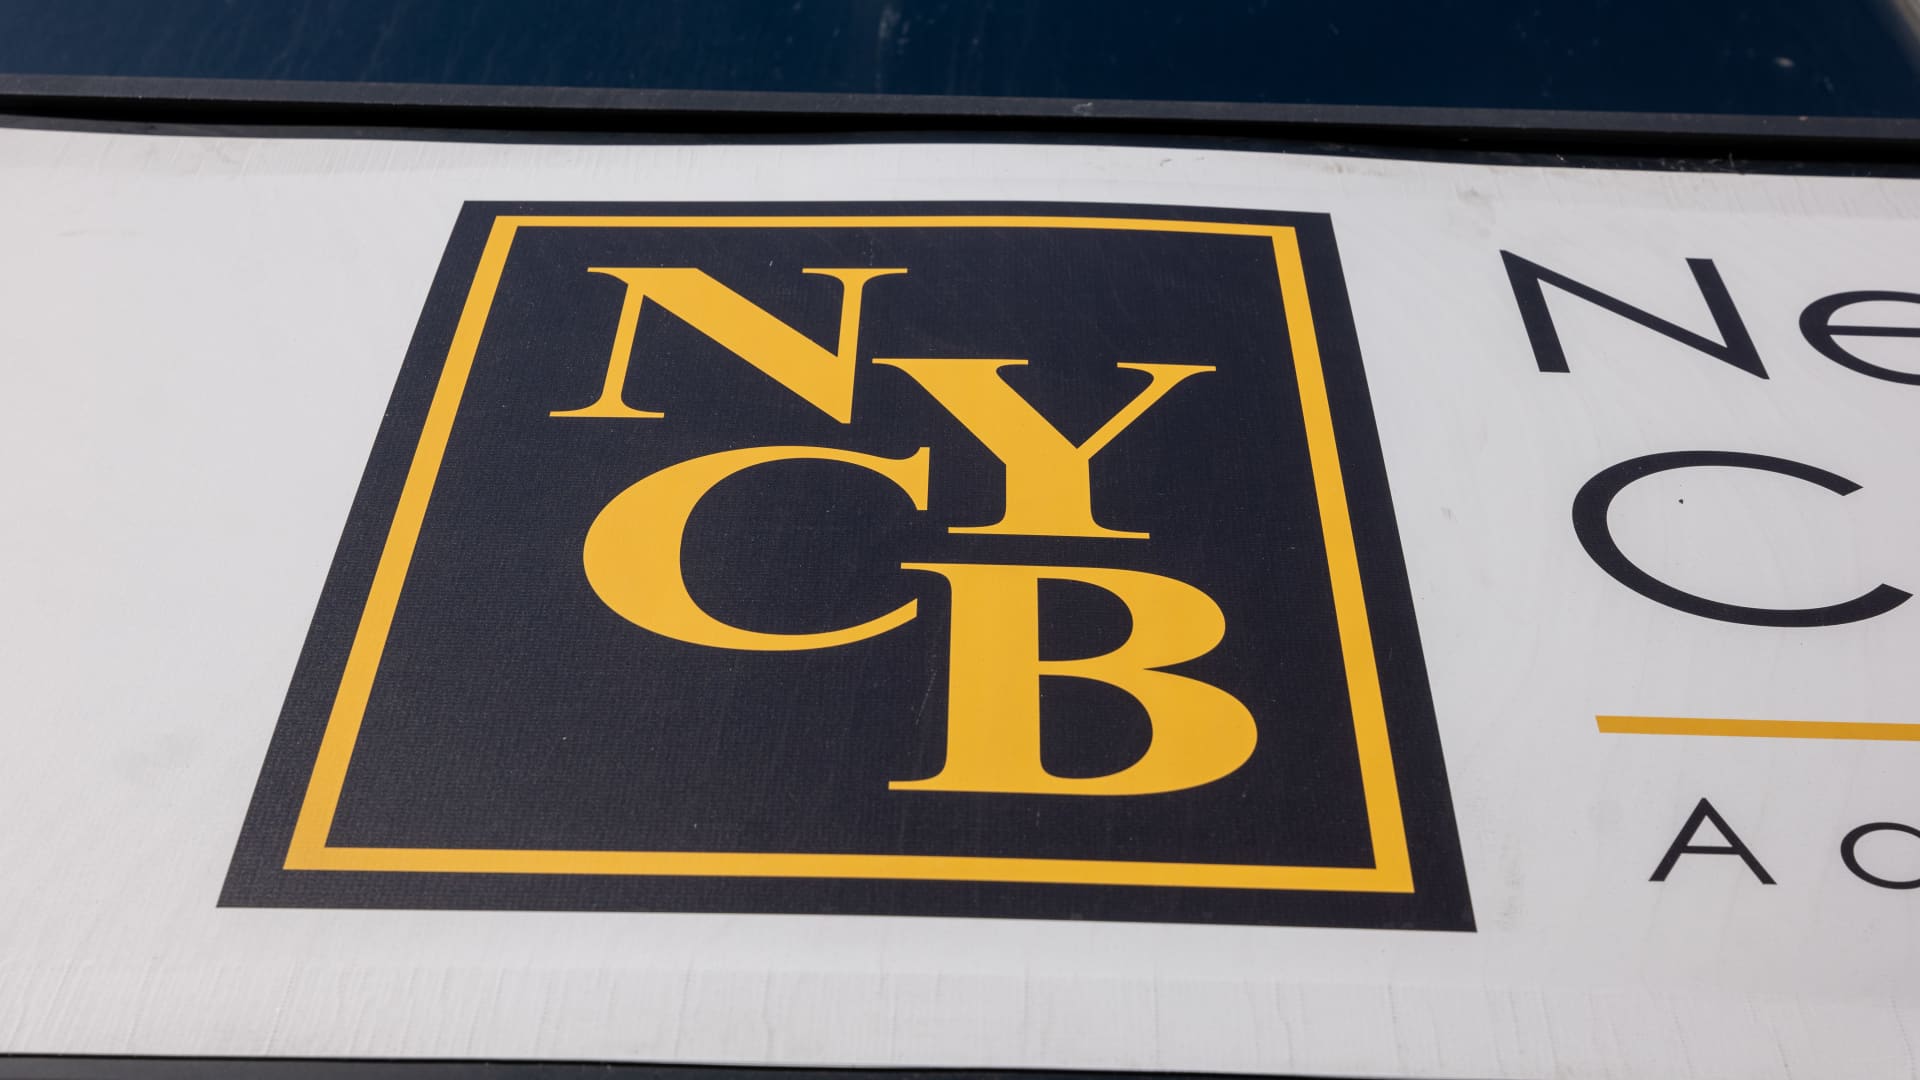 NYCB Stock Falls After Bank Reveals 'Internal Controls' Issue, CEO Change